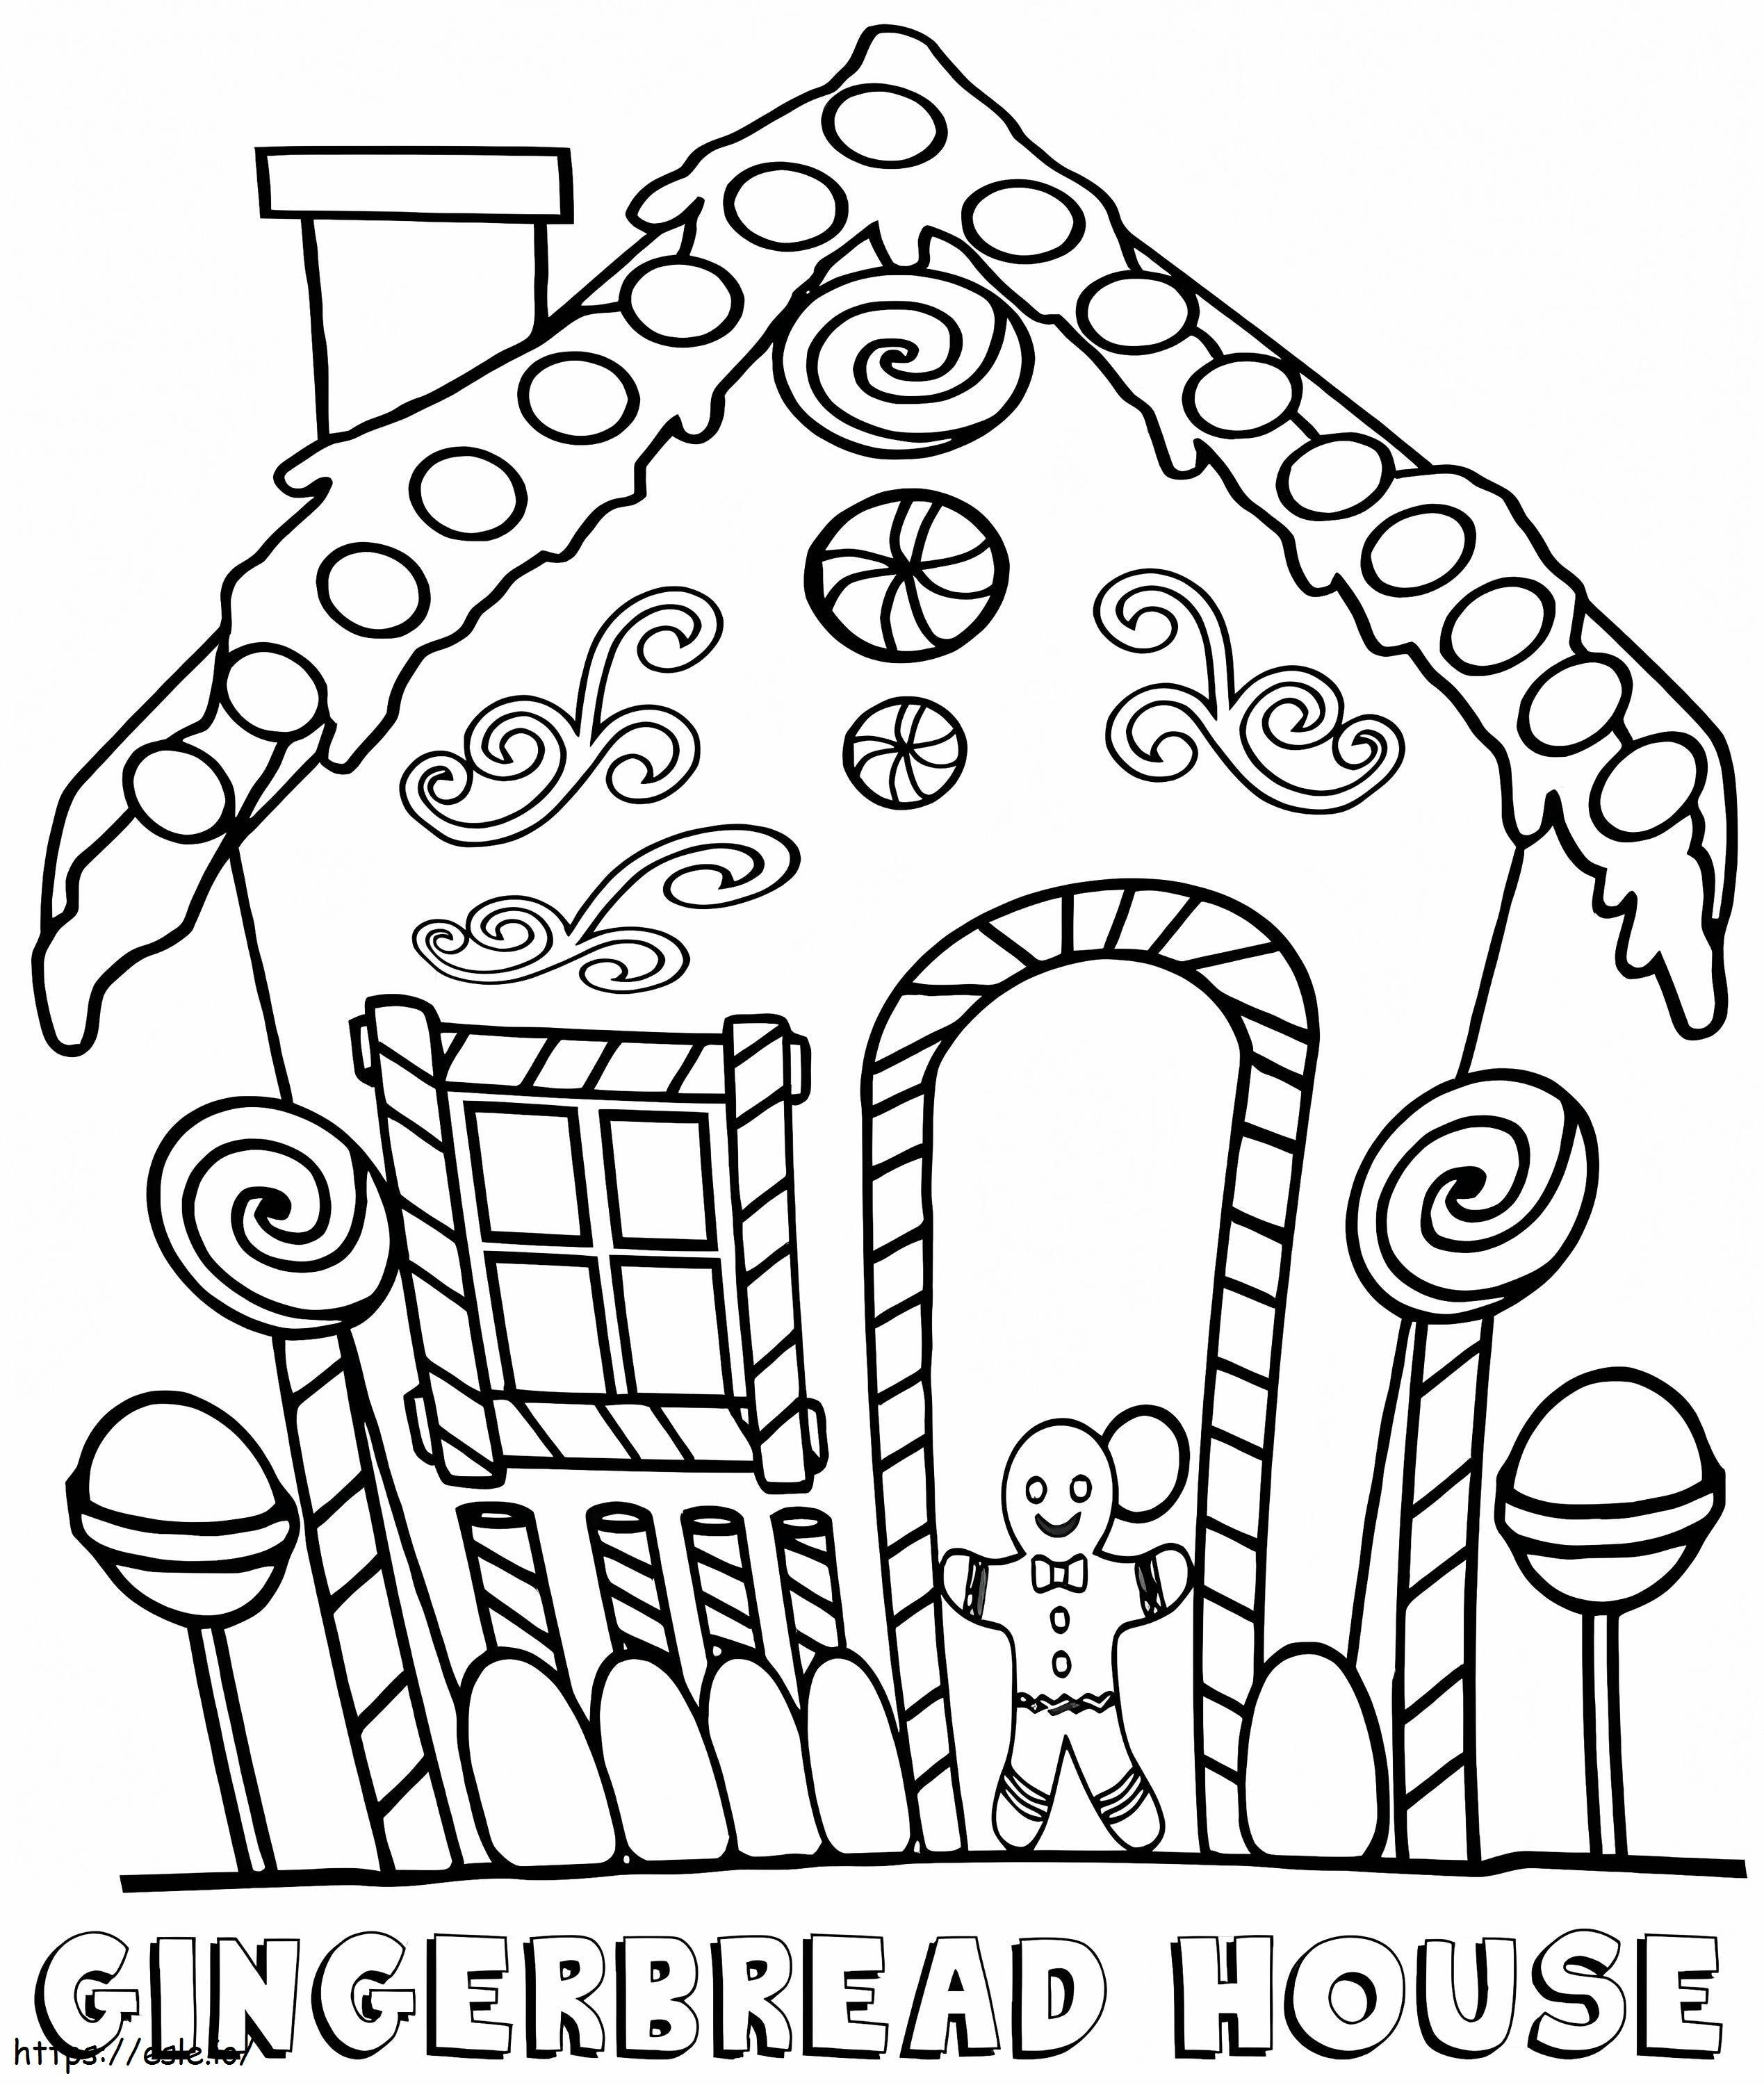 Charming Gingerbread House coloring page